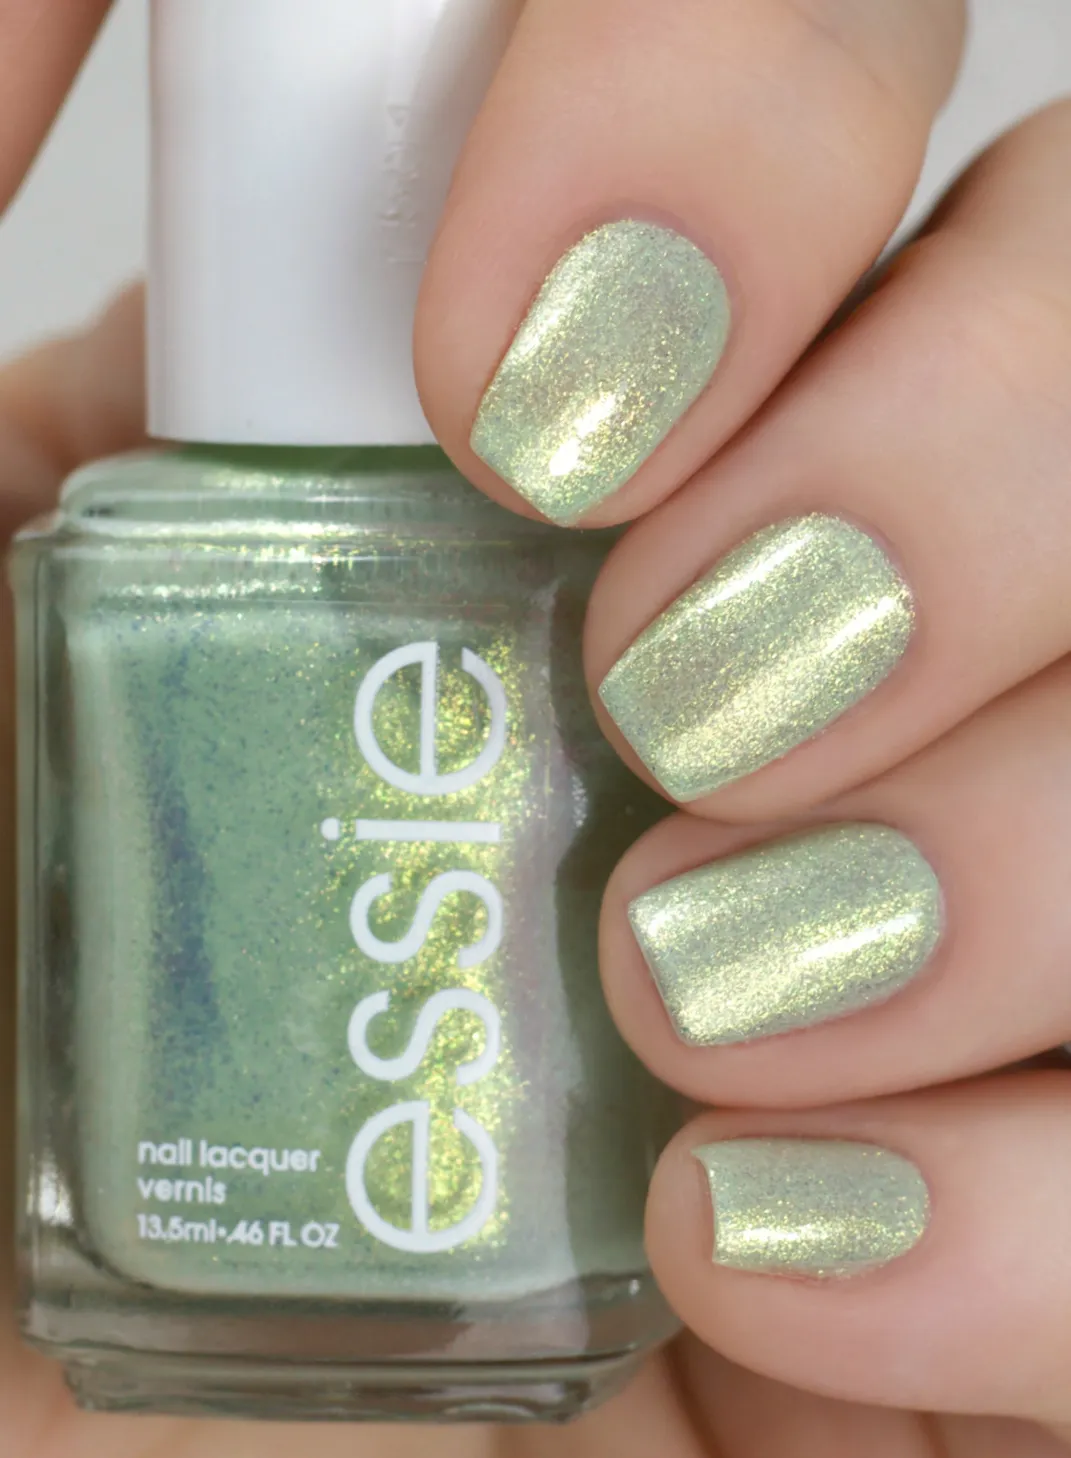 Essie Peppermint Conditions [1]